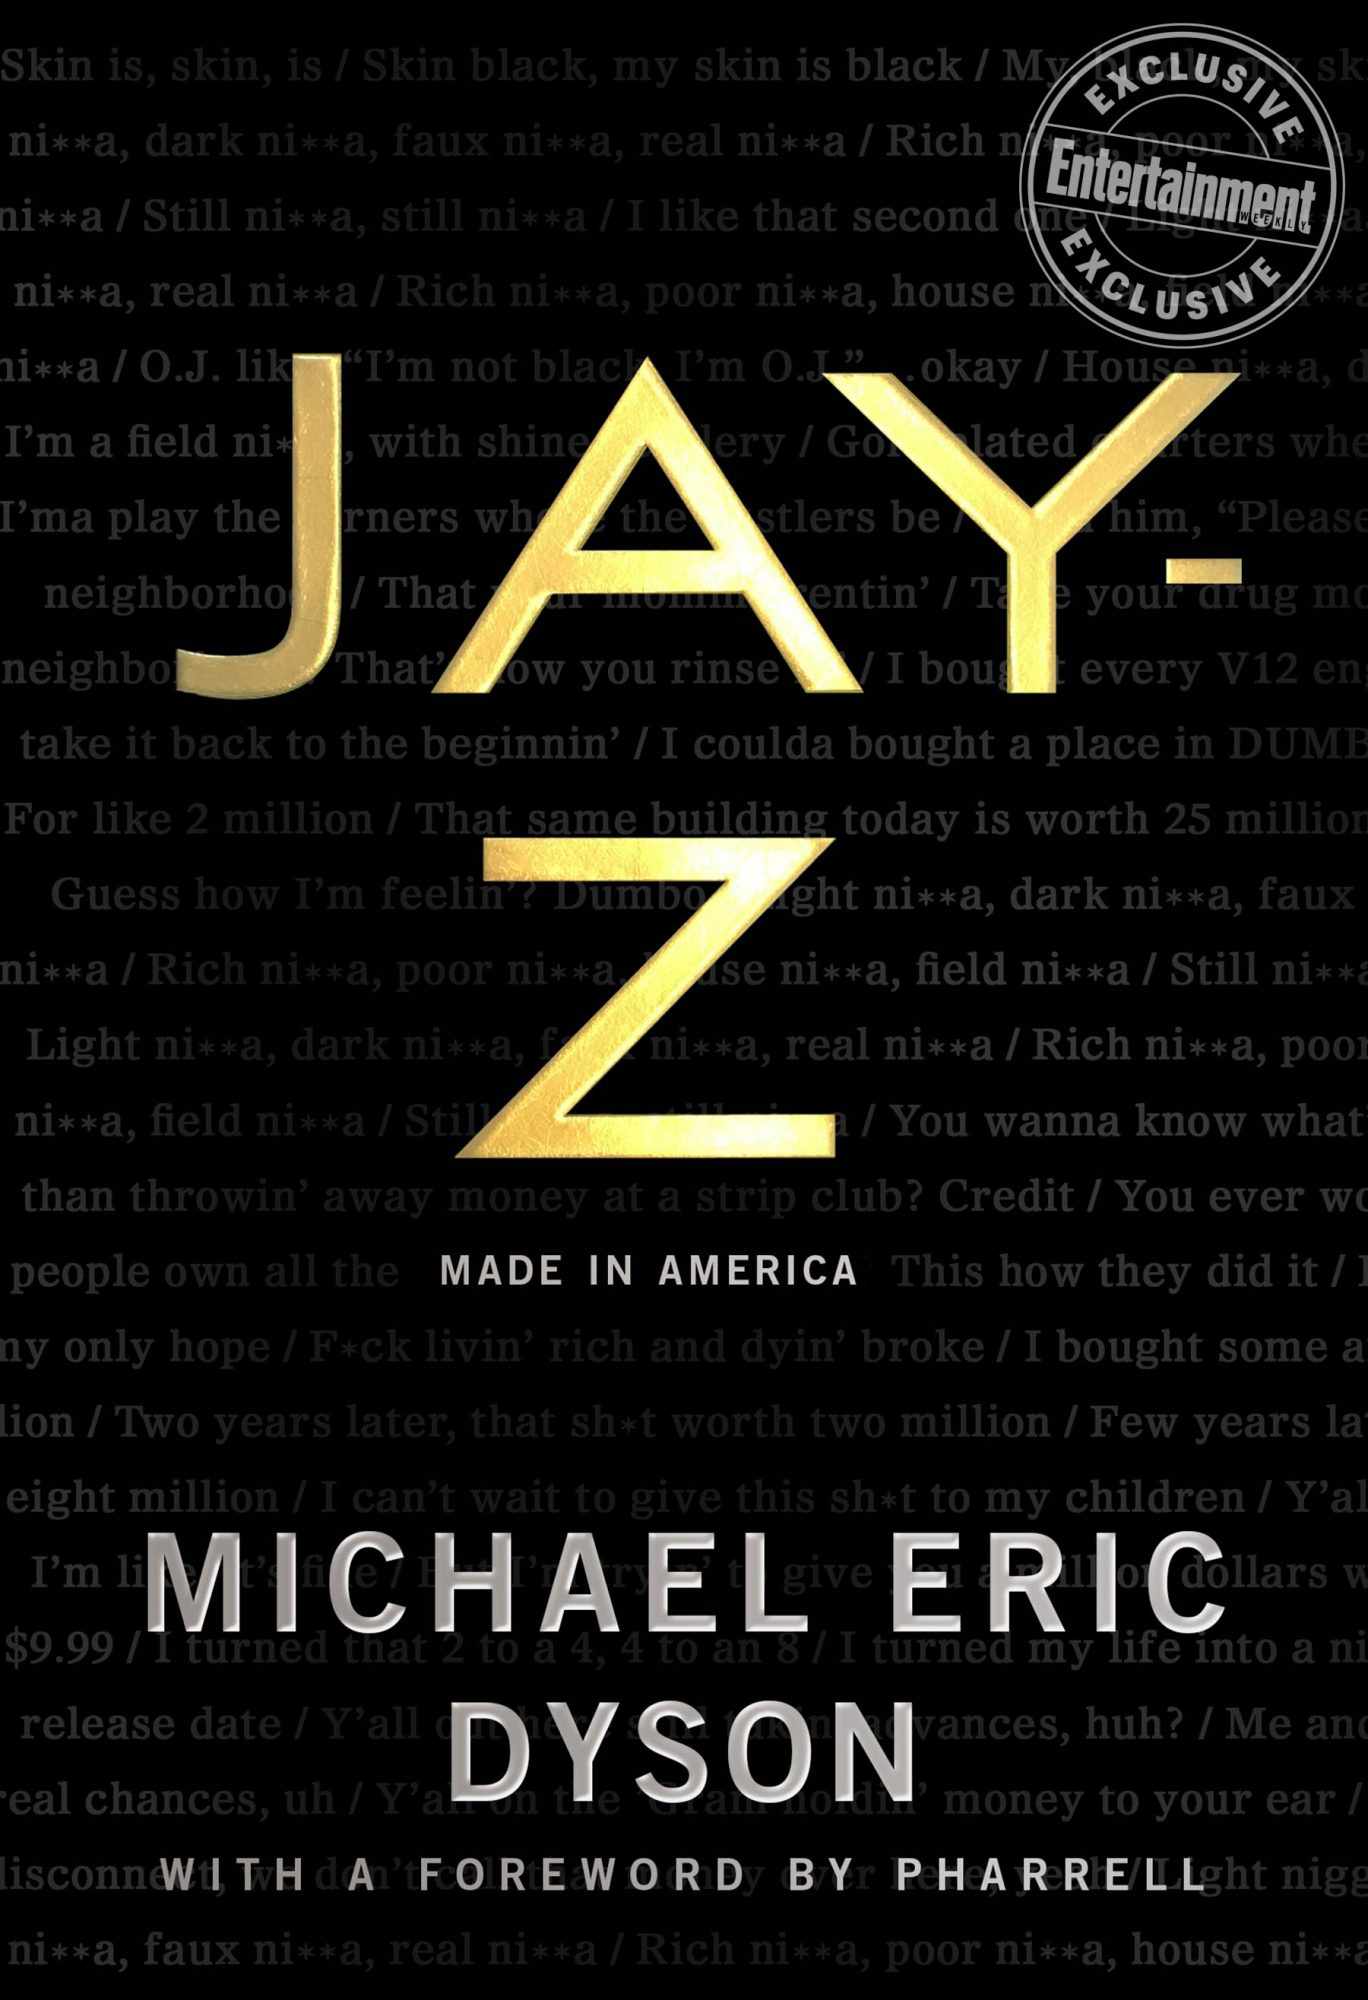 Jay-Z: Made In America by Michael Eric Dyson